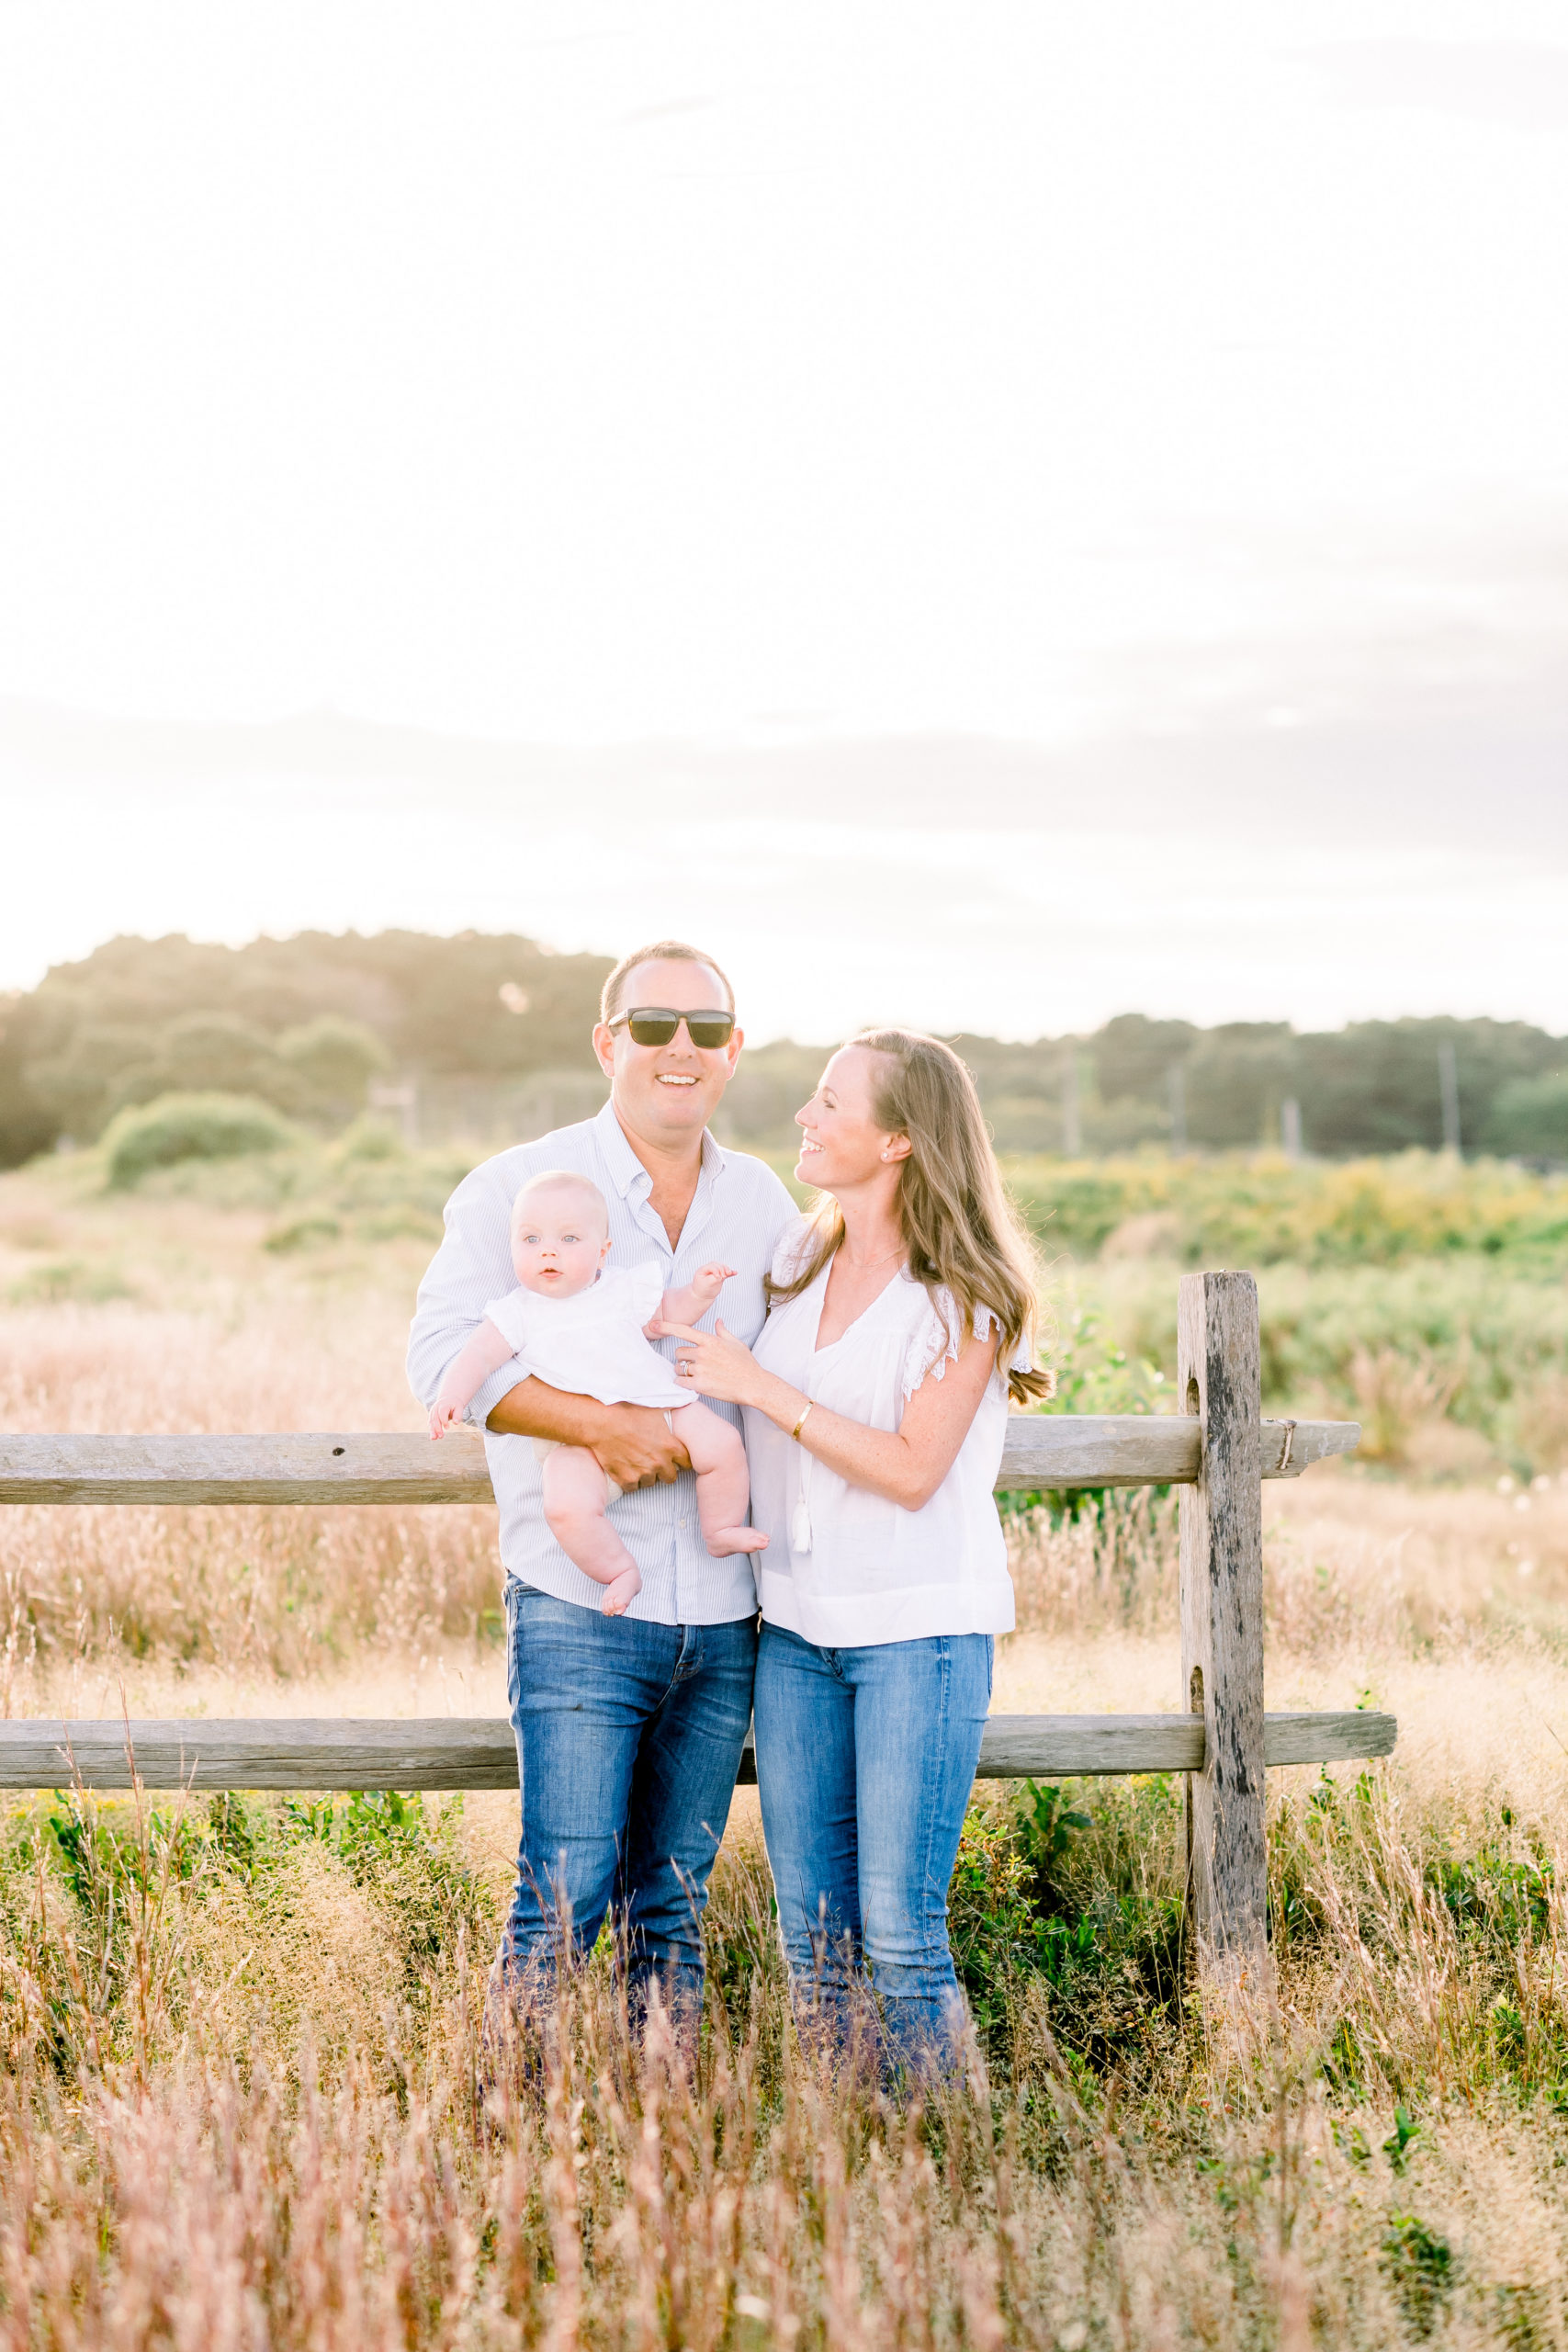 Claire's Family Photos in Nantucket